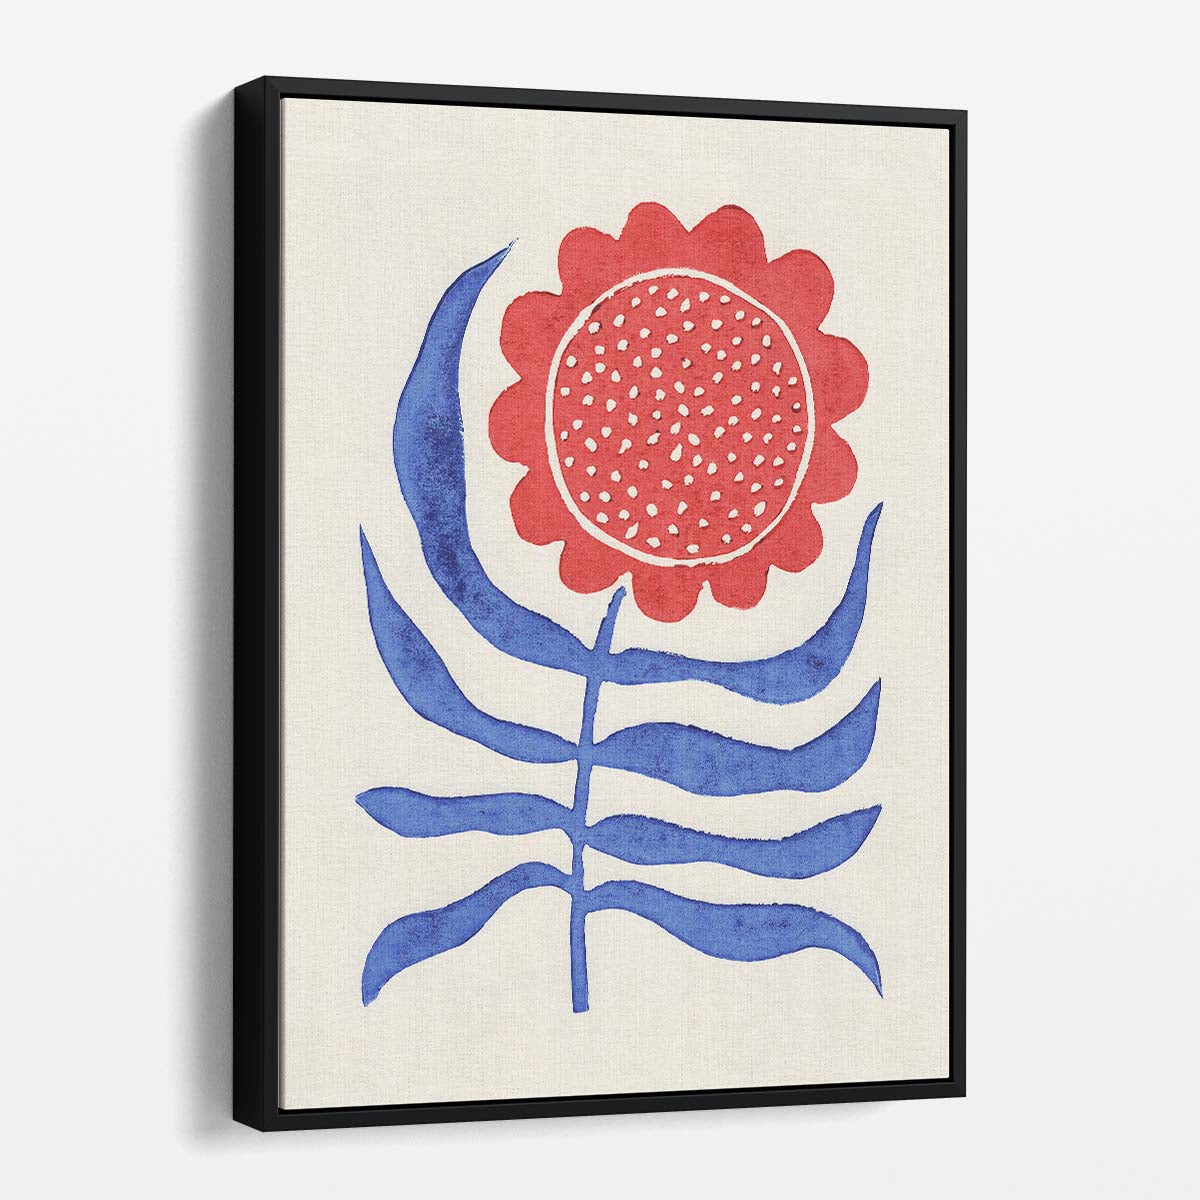 Minimalist Red Flower Blue Leaves Linocut Illustration - Floral Craft Printmaking Art by Luxuriance Designs, made in USA